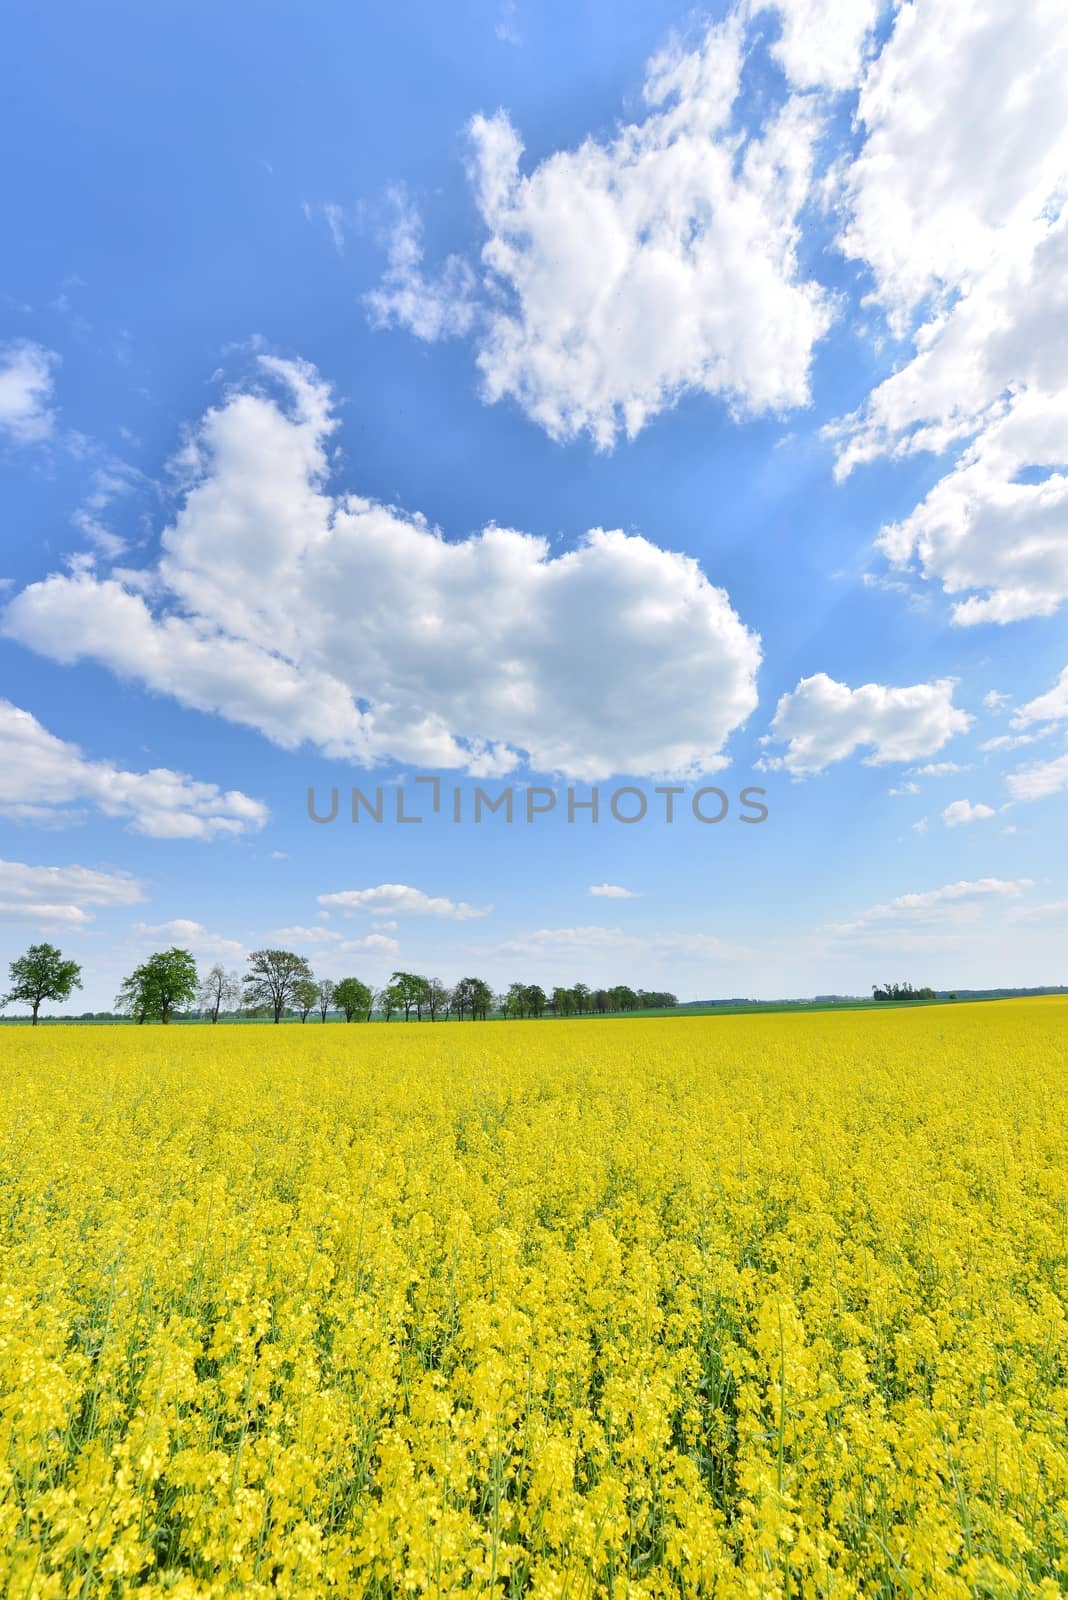 summer landscape with yellow flowers field and blue cloudy sky - Poland